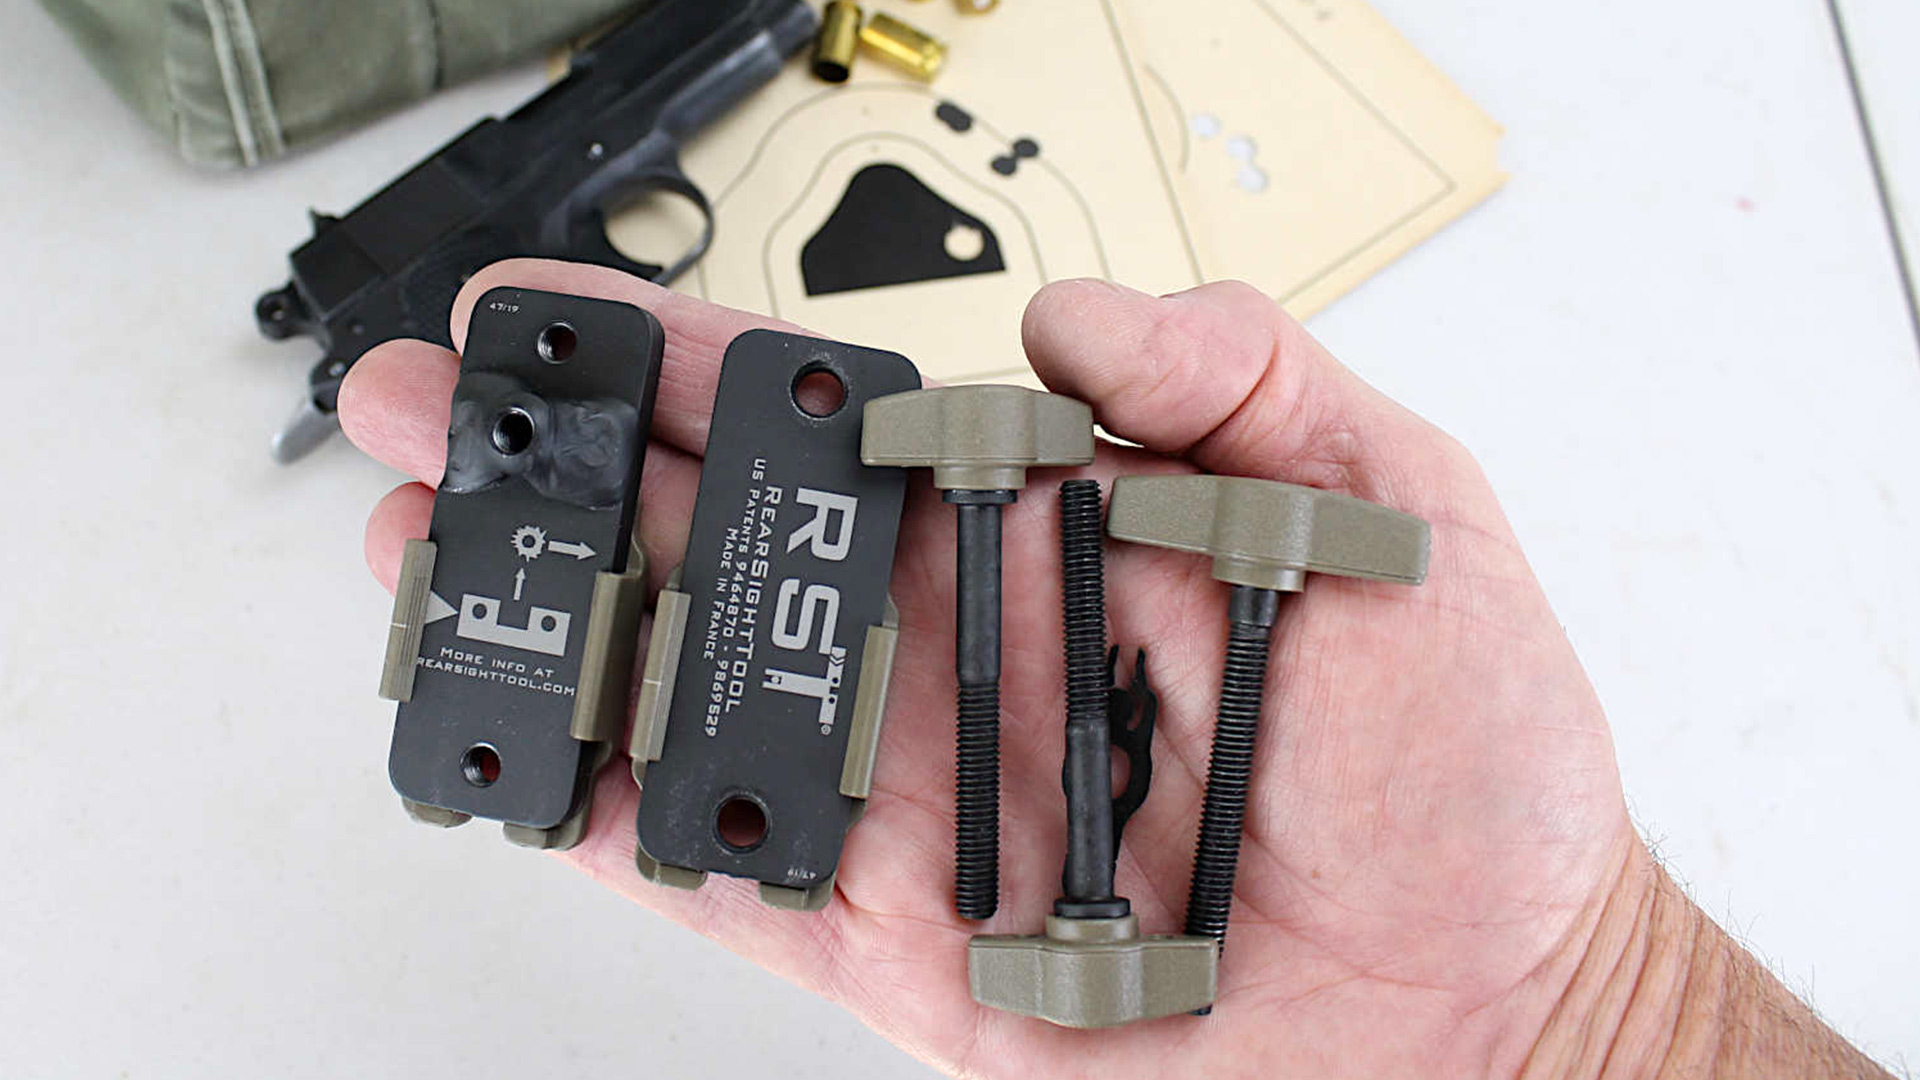 The compact RST (Rear Sight Tool) for pistols